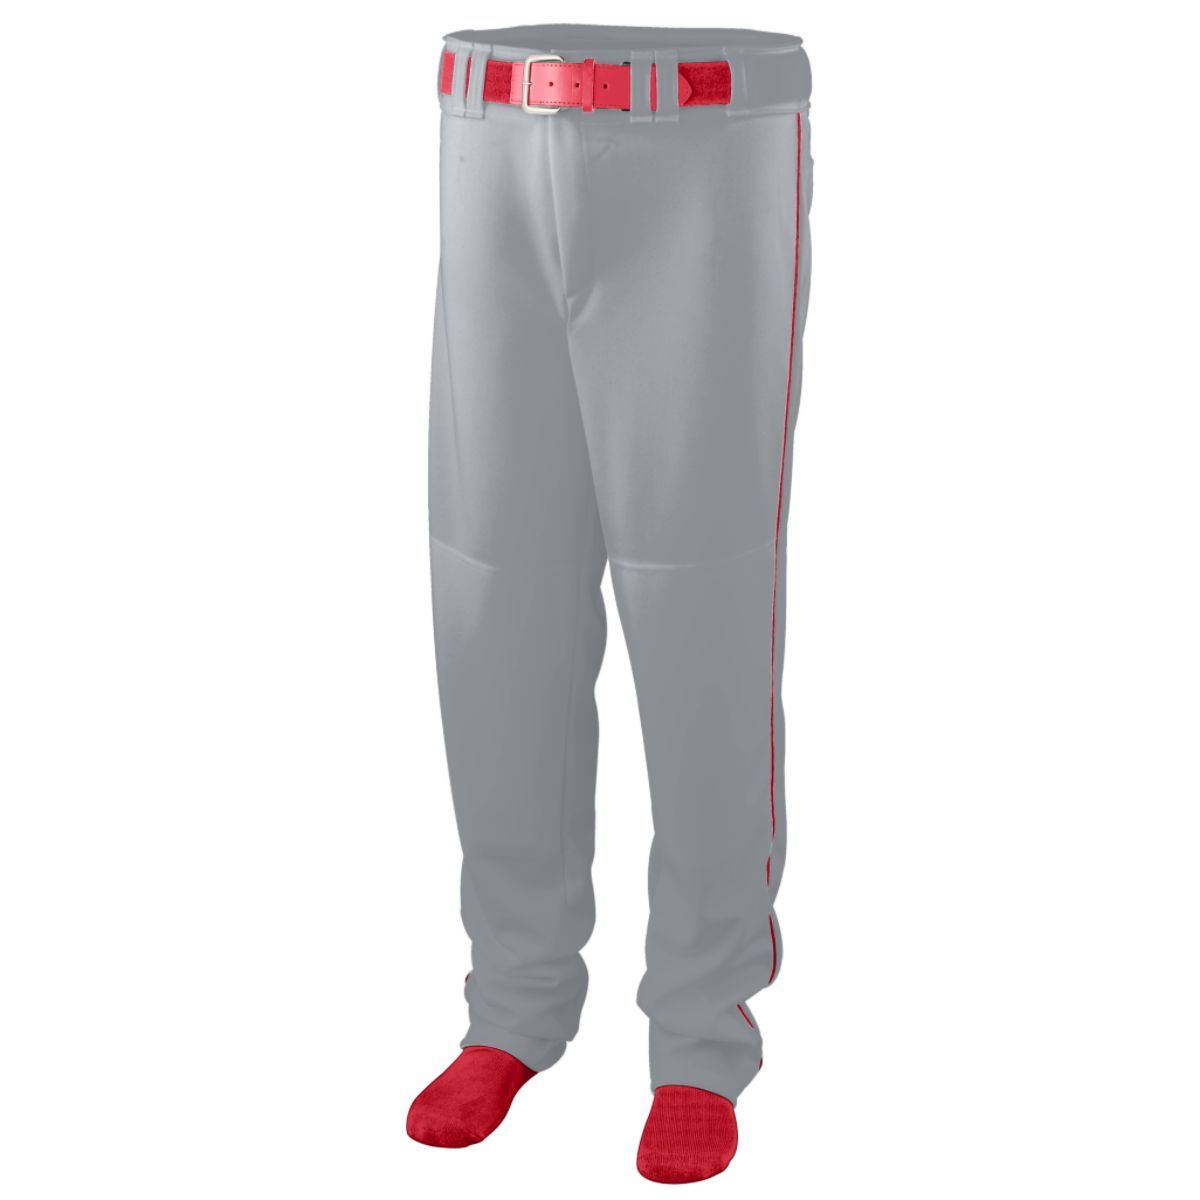 Augusta Sportswear Series Baseball/Softball Pant With Piping in Silver Grey/Red  -Part of the Adult, Adult-Pants, Pants, Augusta-Products, Baseball, All-Sports, All-Sports-1 product lines at KanaleyCreations.com